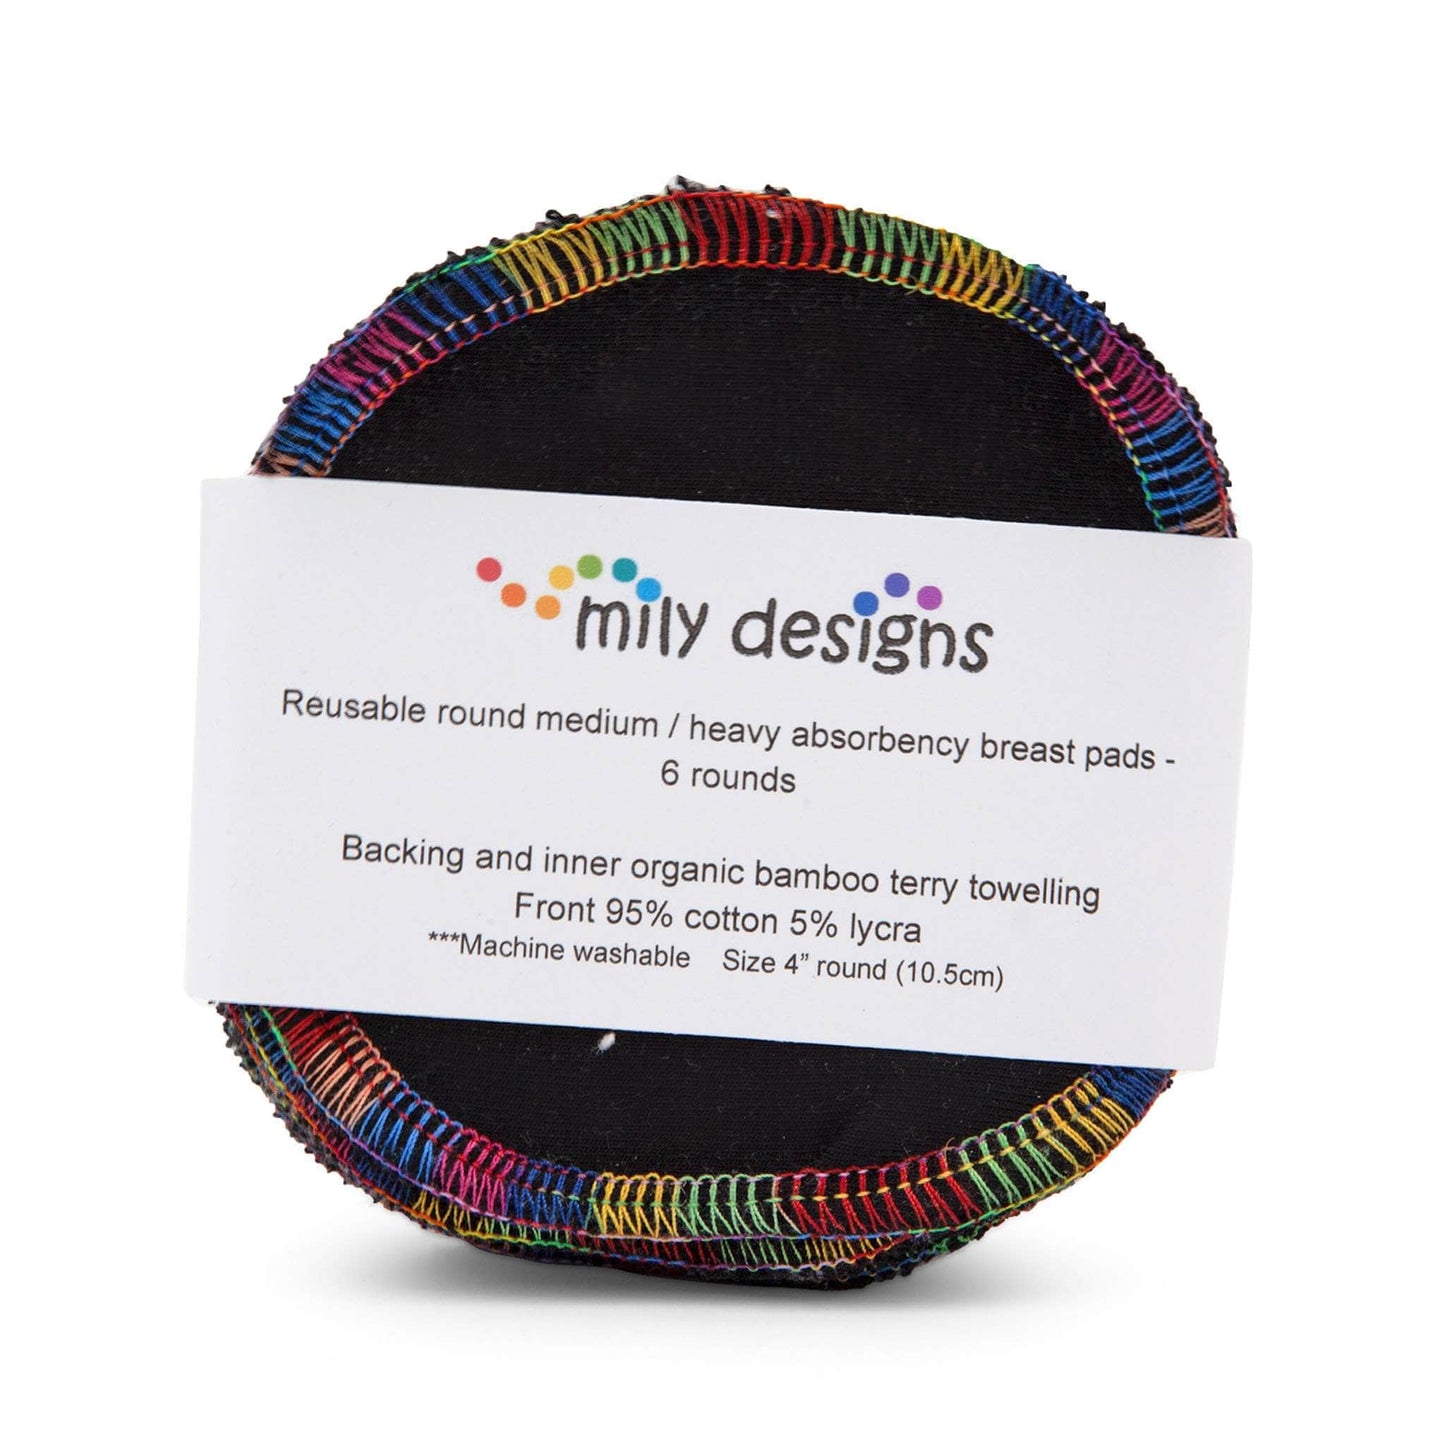 Mily Designs Facial Rounds Mily Designs Facial Rounds - 6 Pack - Love is Love Pride Edition